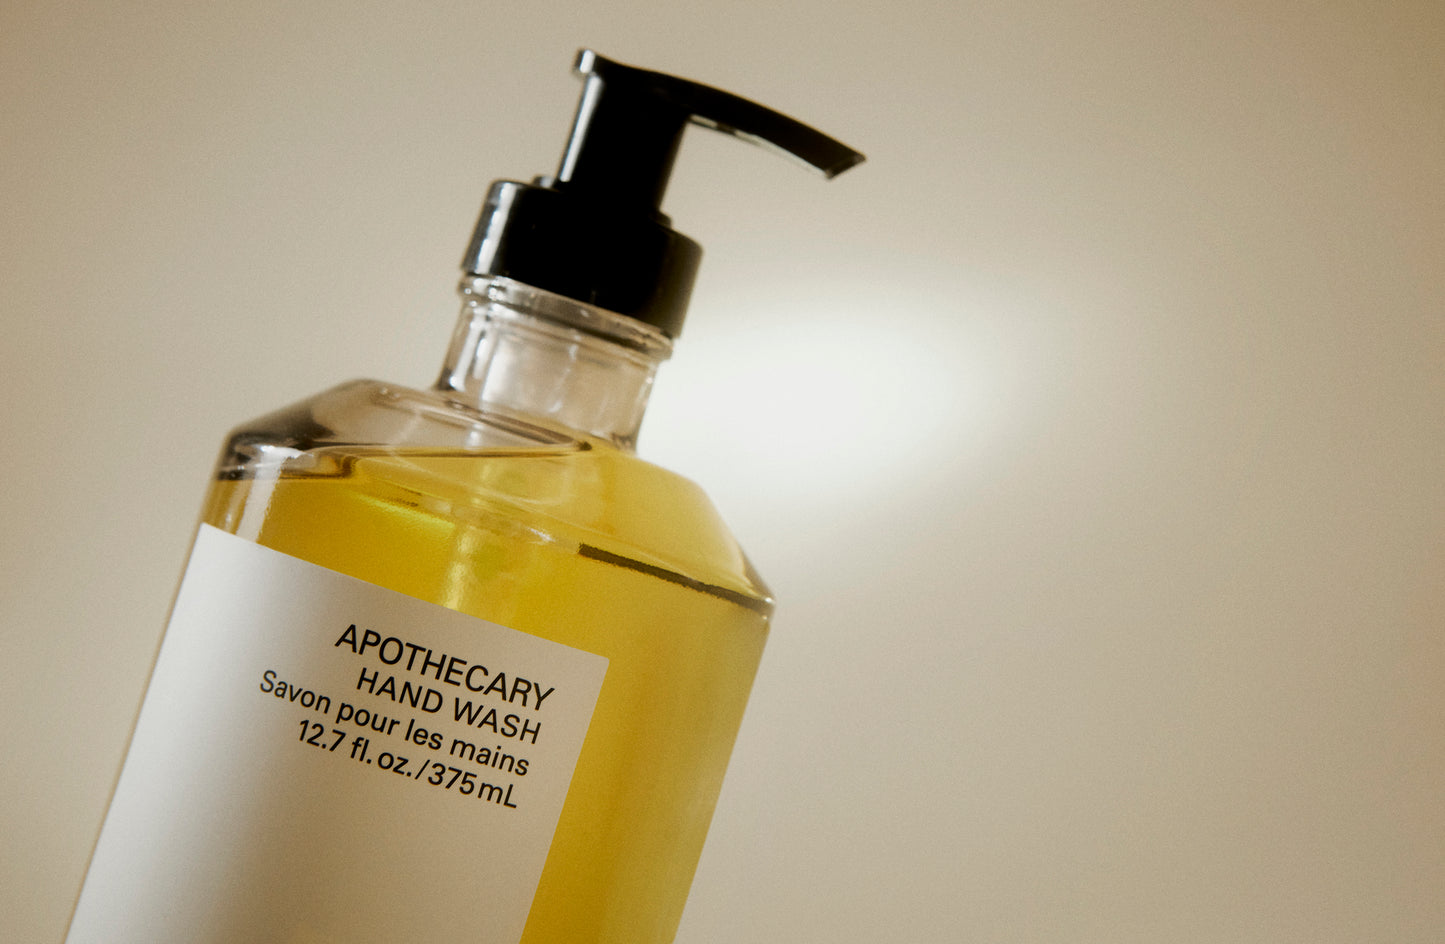 Apothecary Hand Wash by Frama